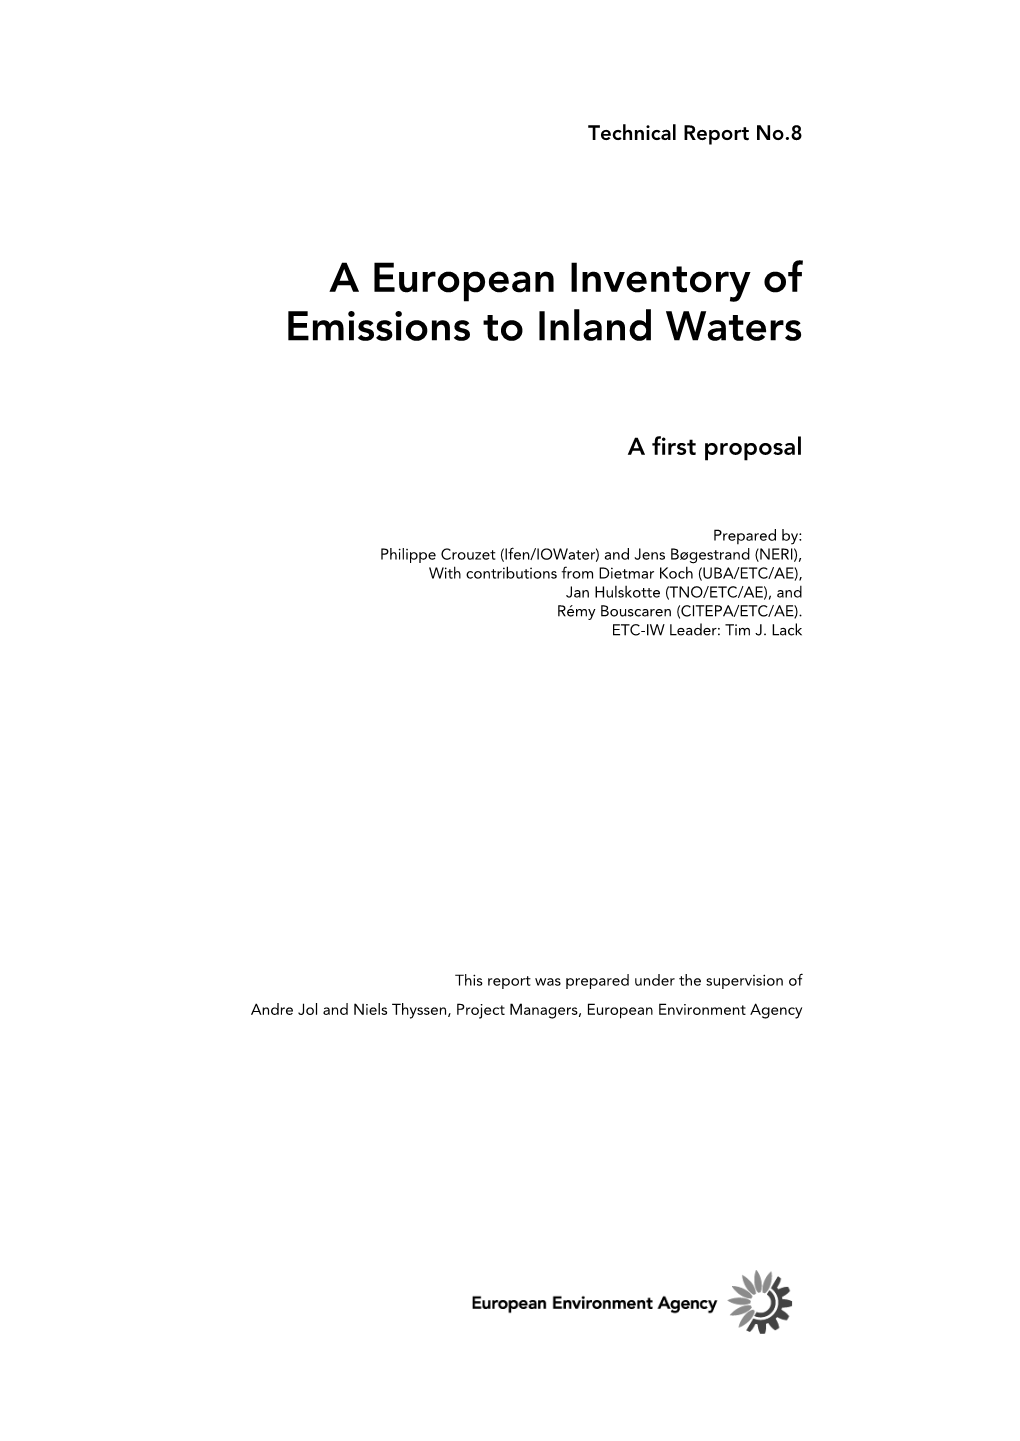 A European Inventory of Emissions to Inland Waters